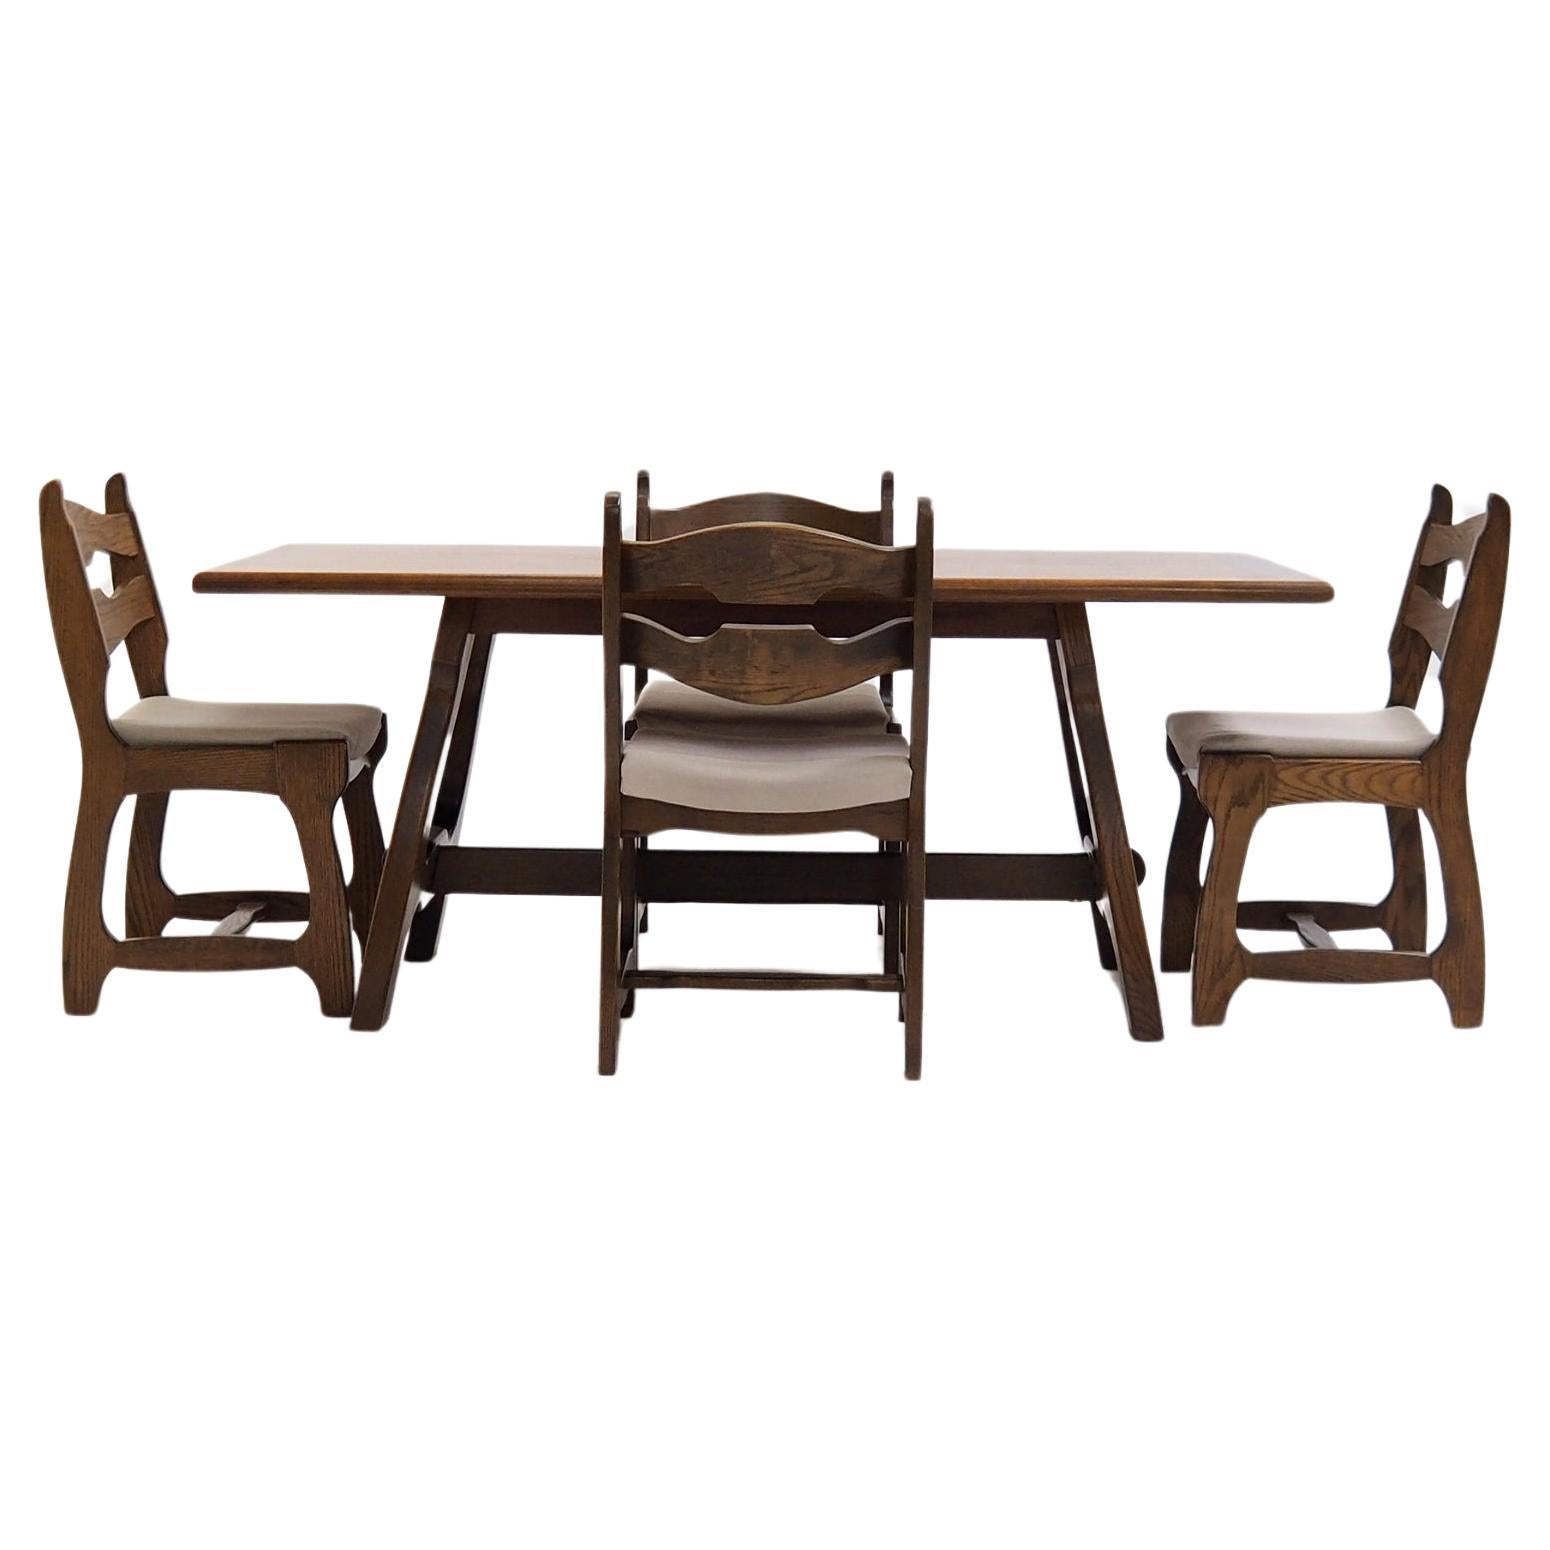 Rare dining set by Robert Guillerme and Jacques Chambron.

The set was designed in the 1950s and manufactured by the French manufacturer “Votre Maison”. It is made entirely of solid oak and is still in vèry good condition. Very sturdy too. Maybe the